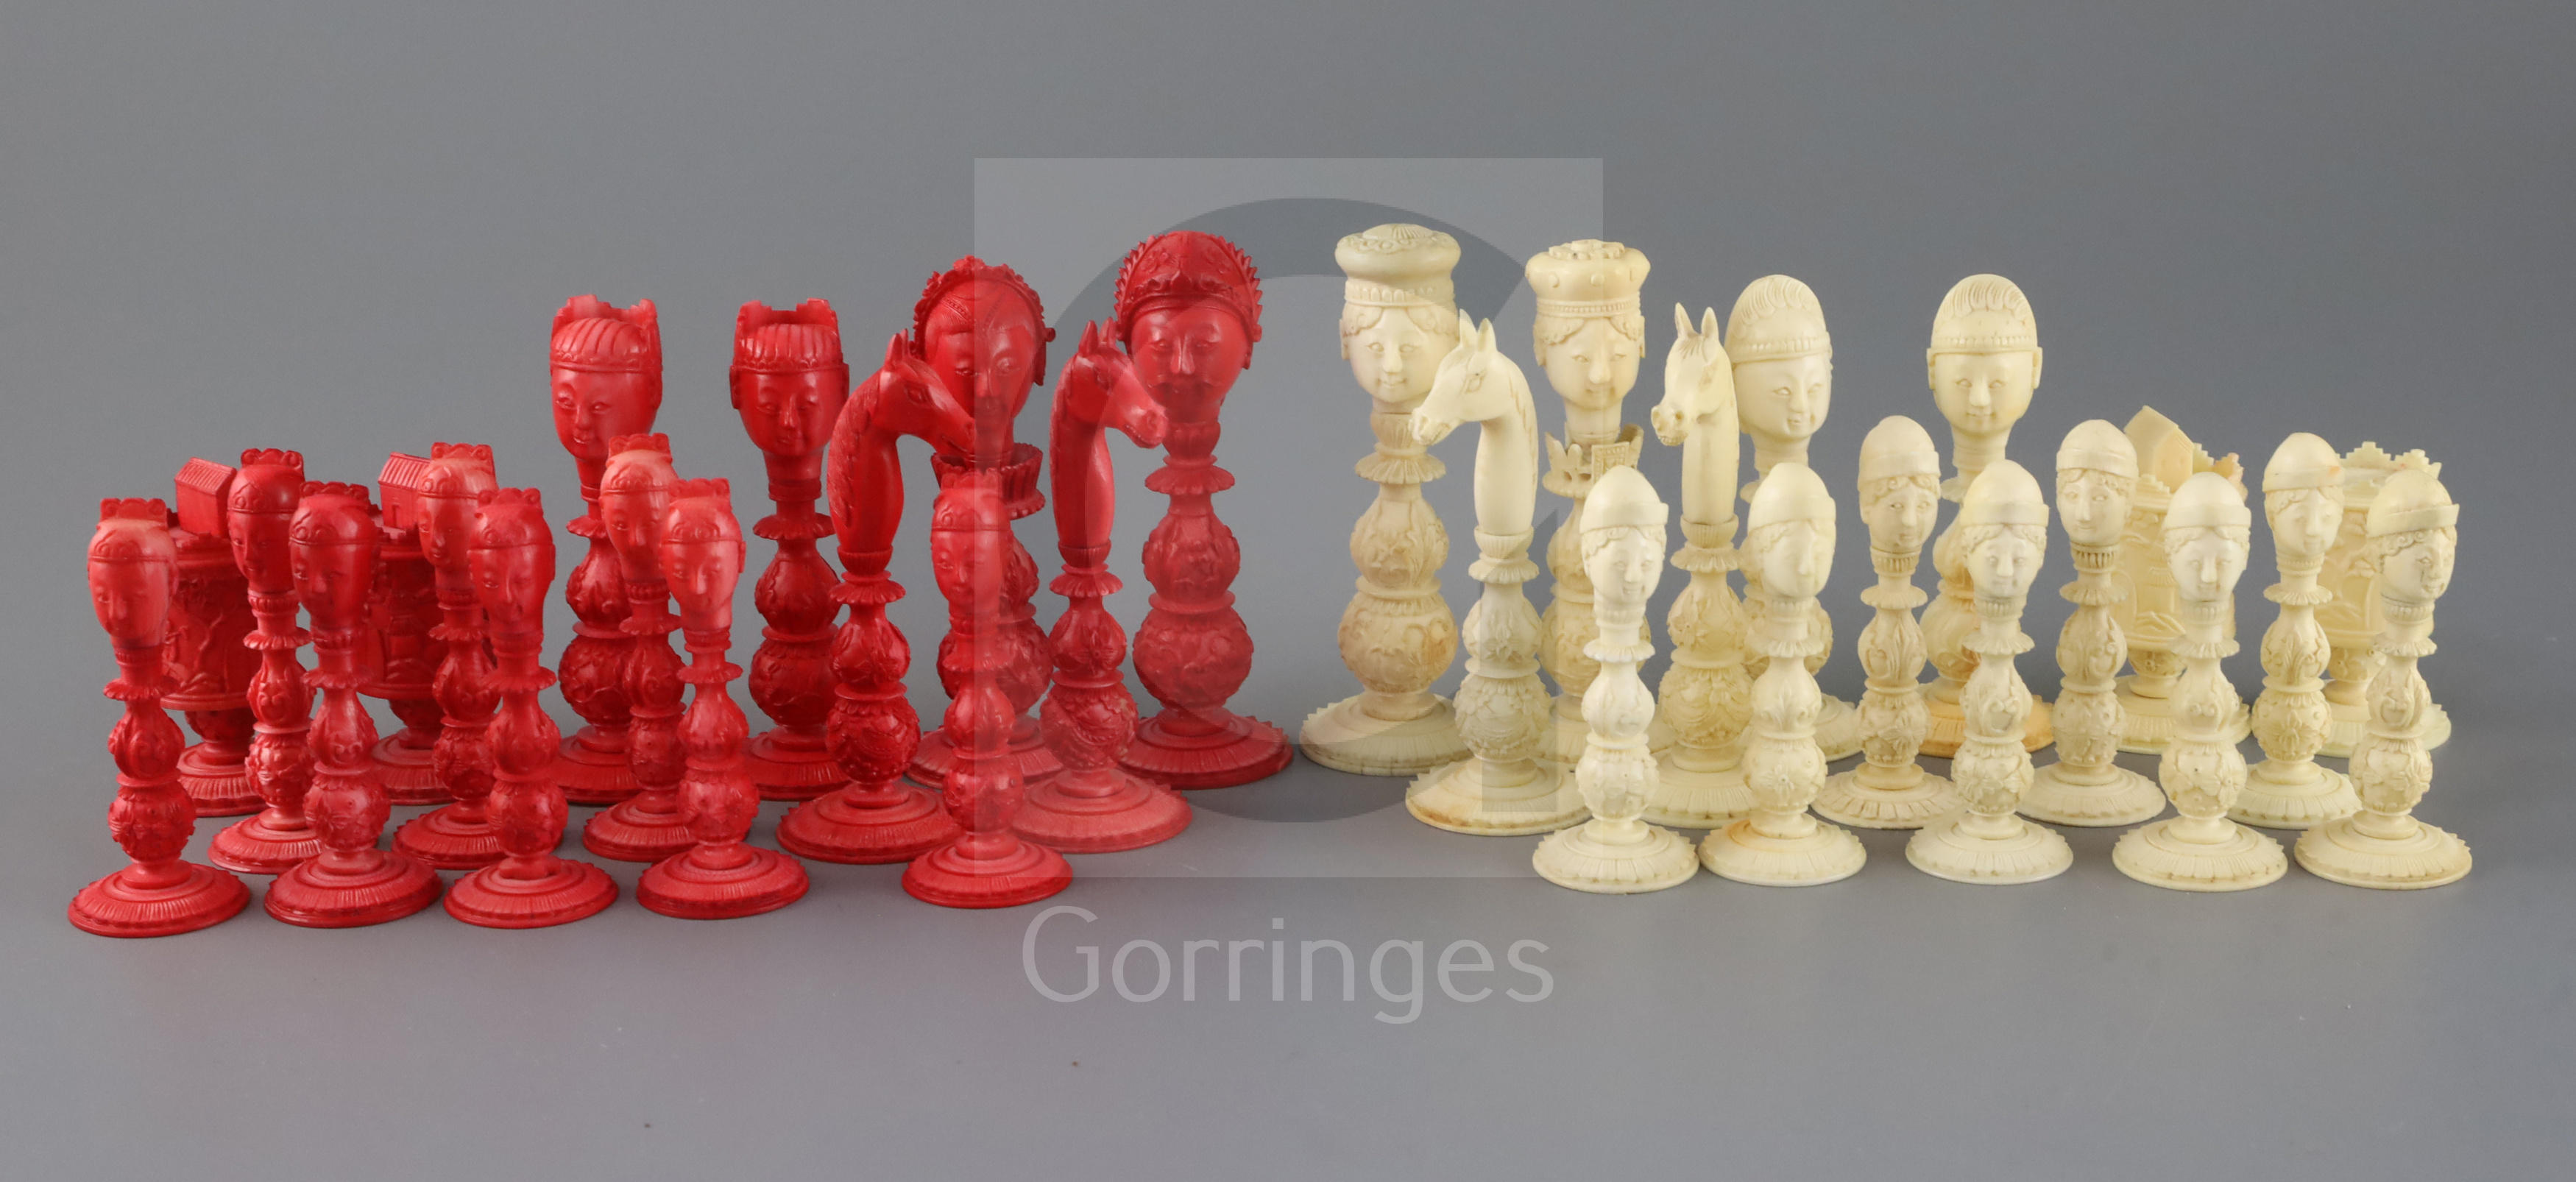 A mid 19th century Macao red stained and natural ivory figural chess set, European and Mongolian